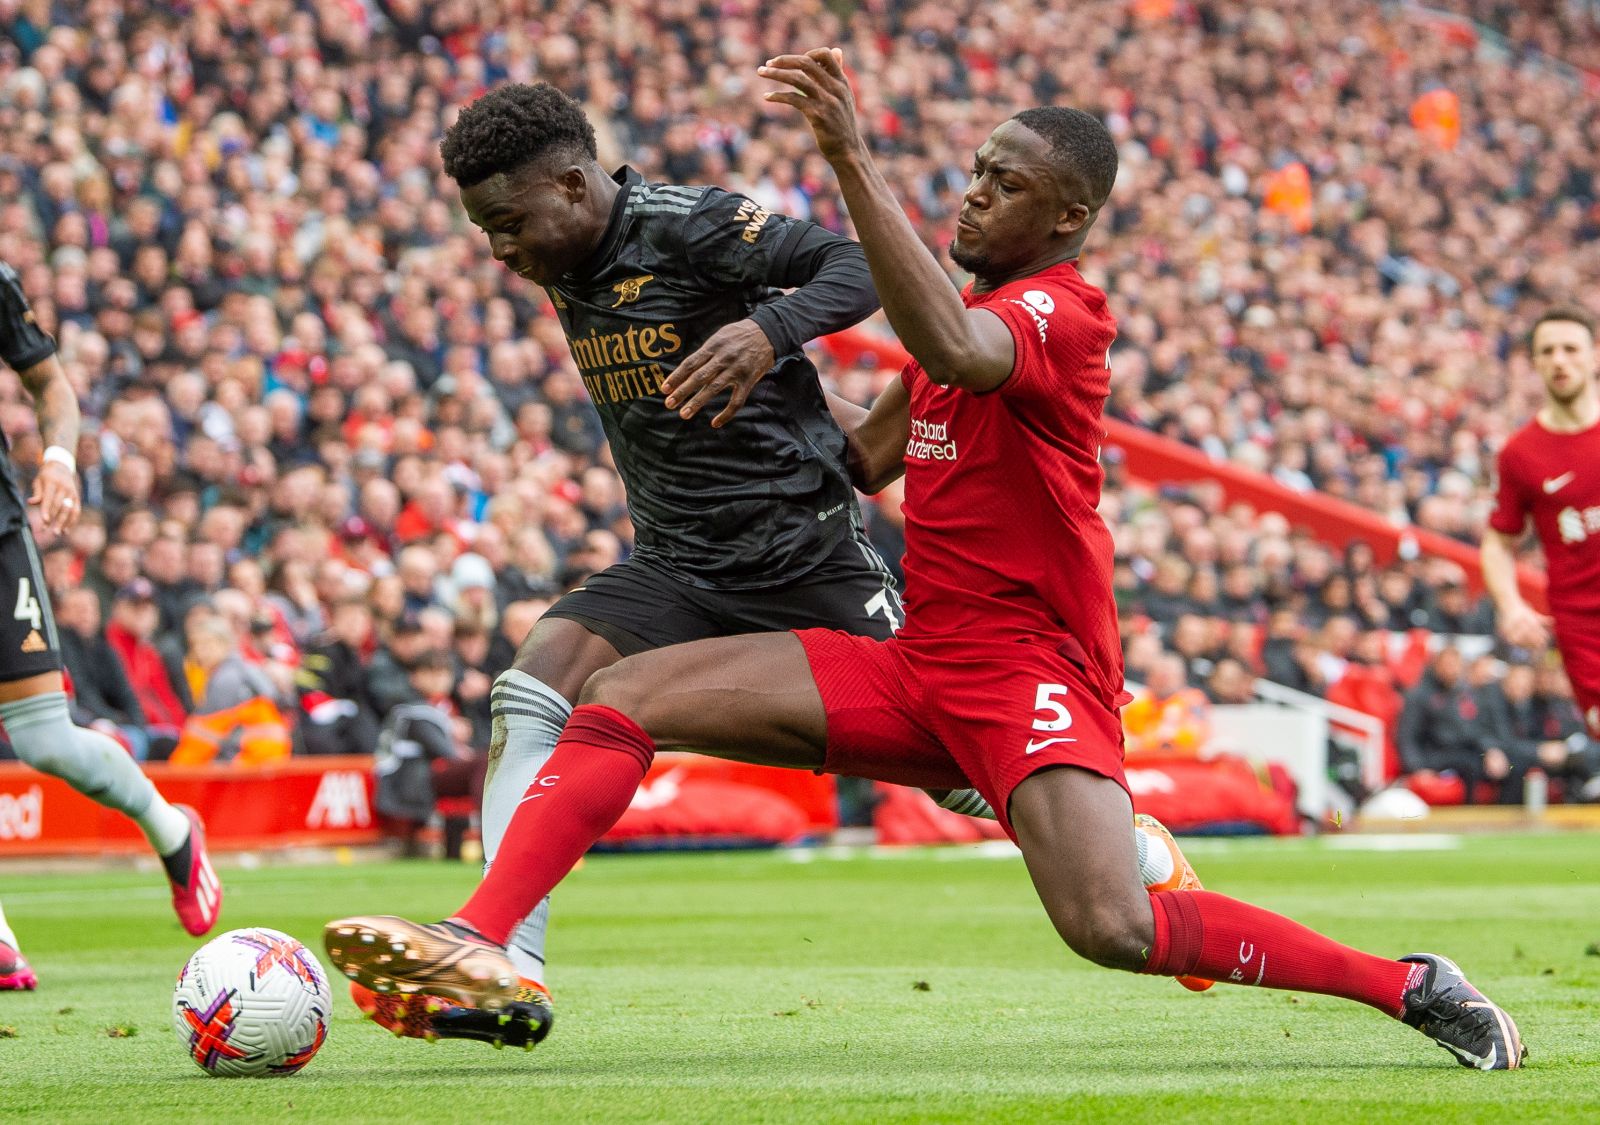 epa10566463 Arsenal's Bukayo Saka (L) in action with Liverpool's Ibrahima Konate  (R) during the English Premier League soccer match between Liverpool and Arsenal at Anfield in Liverpool, Britain, 09 April 2023.  EPA/PETER POWELL EDITORIAL USE ONLY. No use with unauthorized audio, video, data, fixture lists, club/league logos or 'live' services. Online in-match use limited to 120 images, no video emulation. No use in betting, games or single club/league/player publications